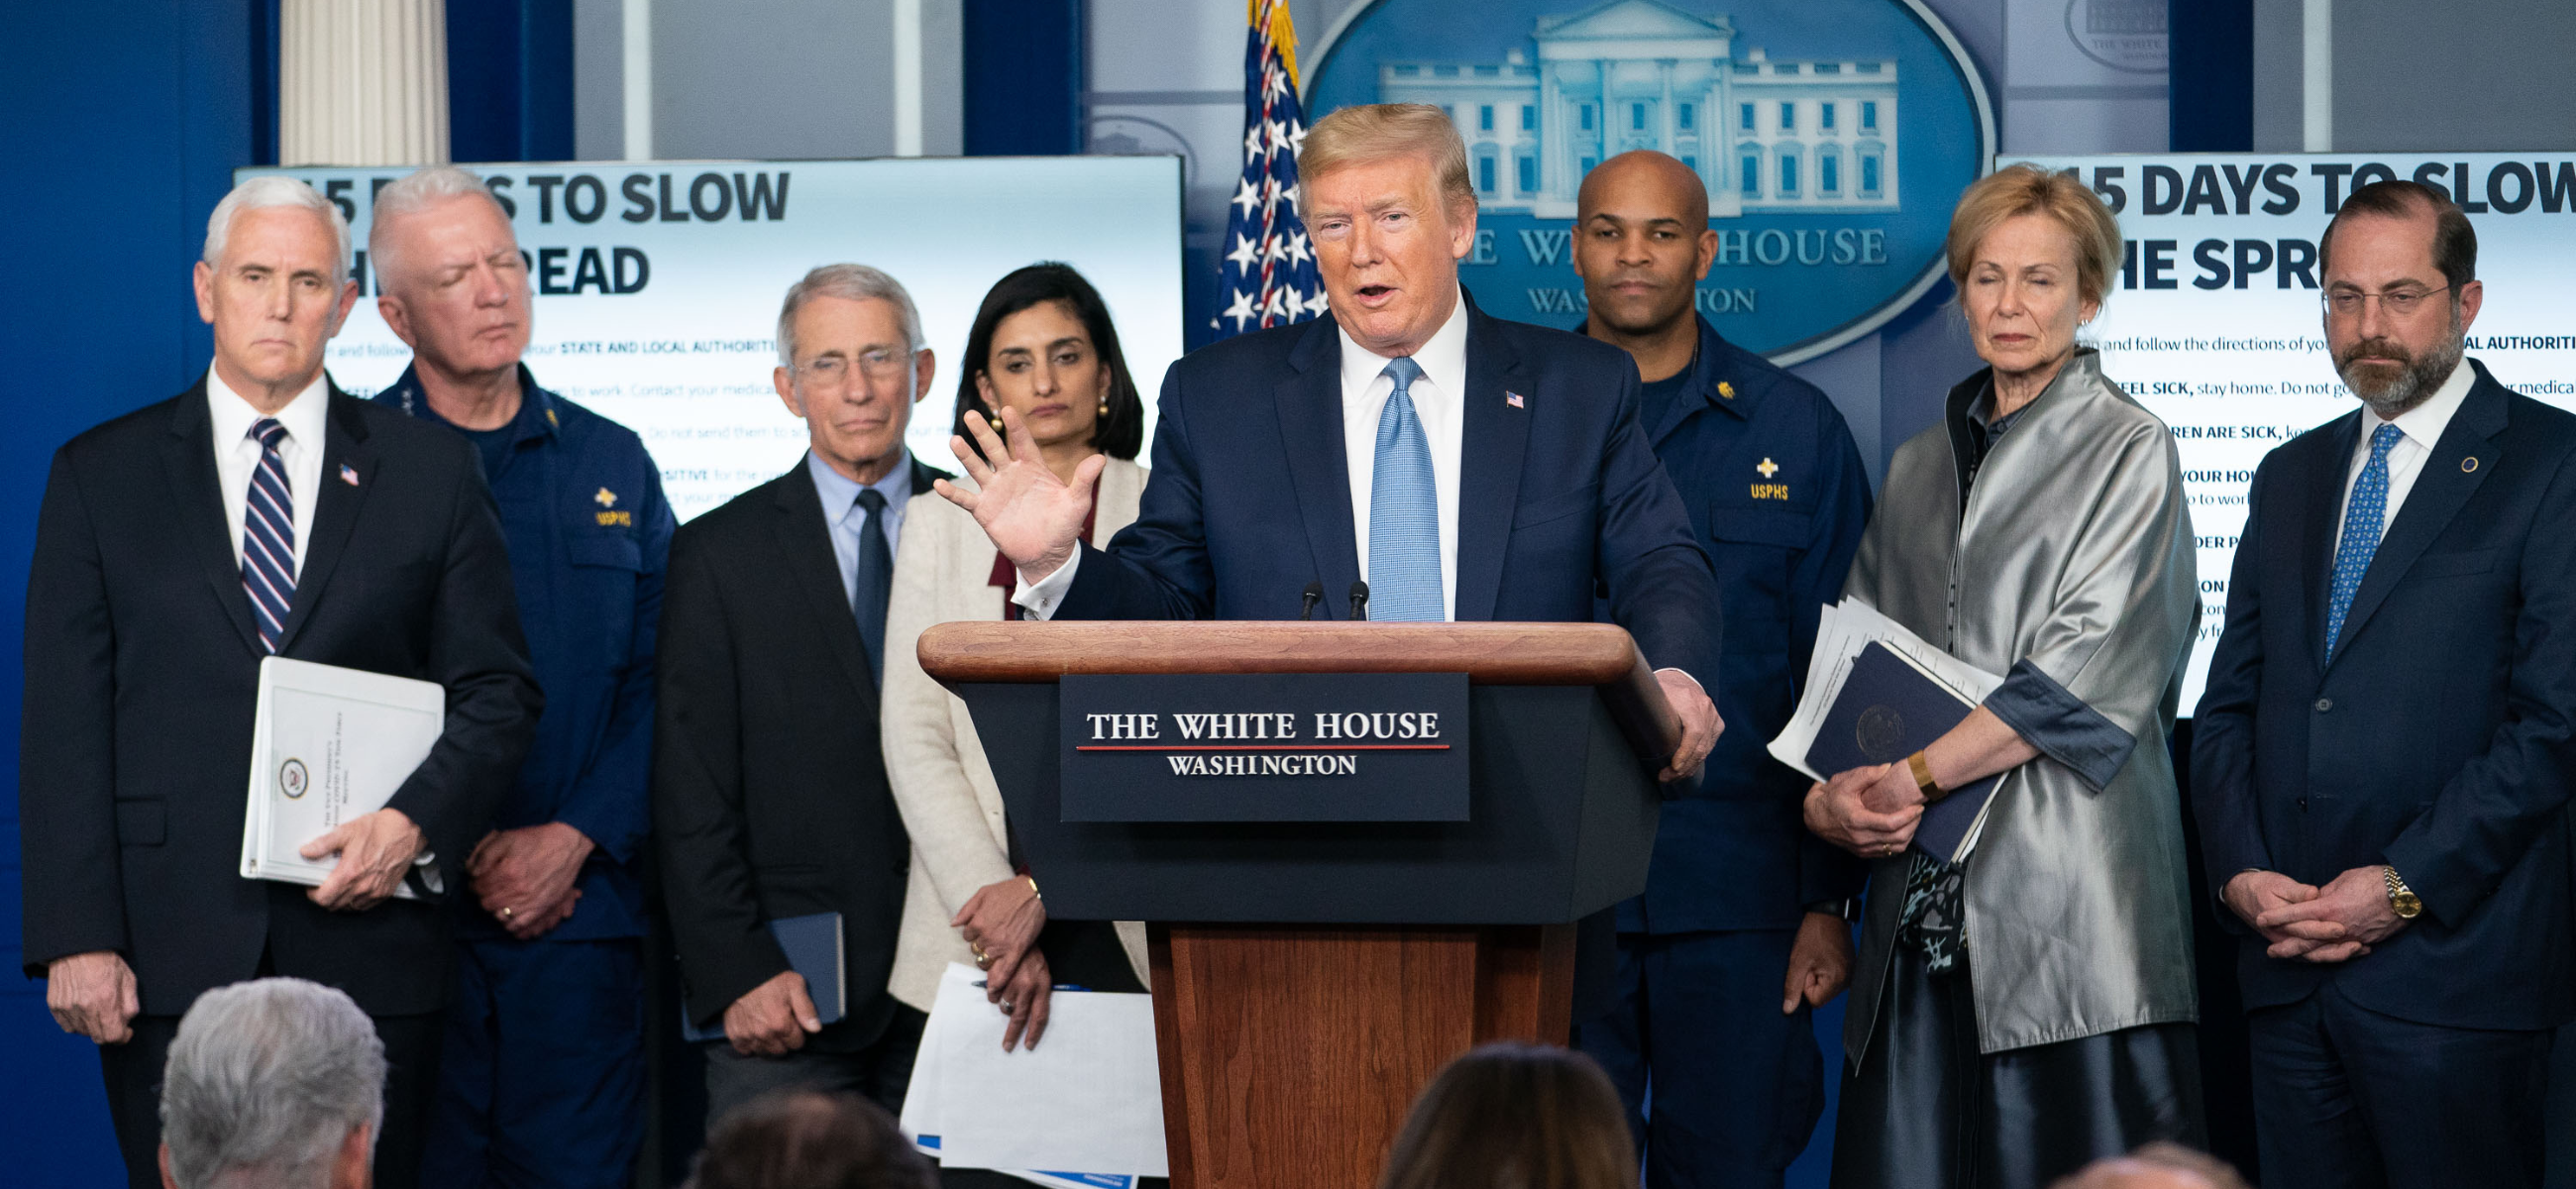 President Donald J. Trump, joined by Vice President Mike Pence and members of the White House Coronavirus Task Force, delivers remarks at a coronavirus update briefing Monday, March 16, 2020, in the James S. Brady Press Briefing Room of the White House. (Official White House Photo by D. Myles Cullen)